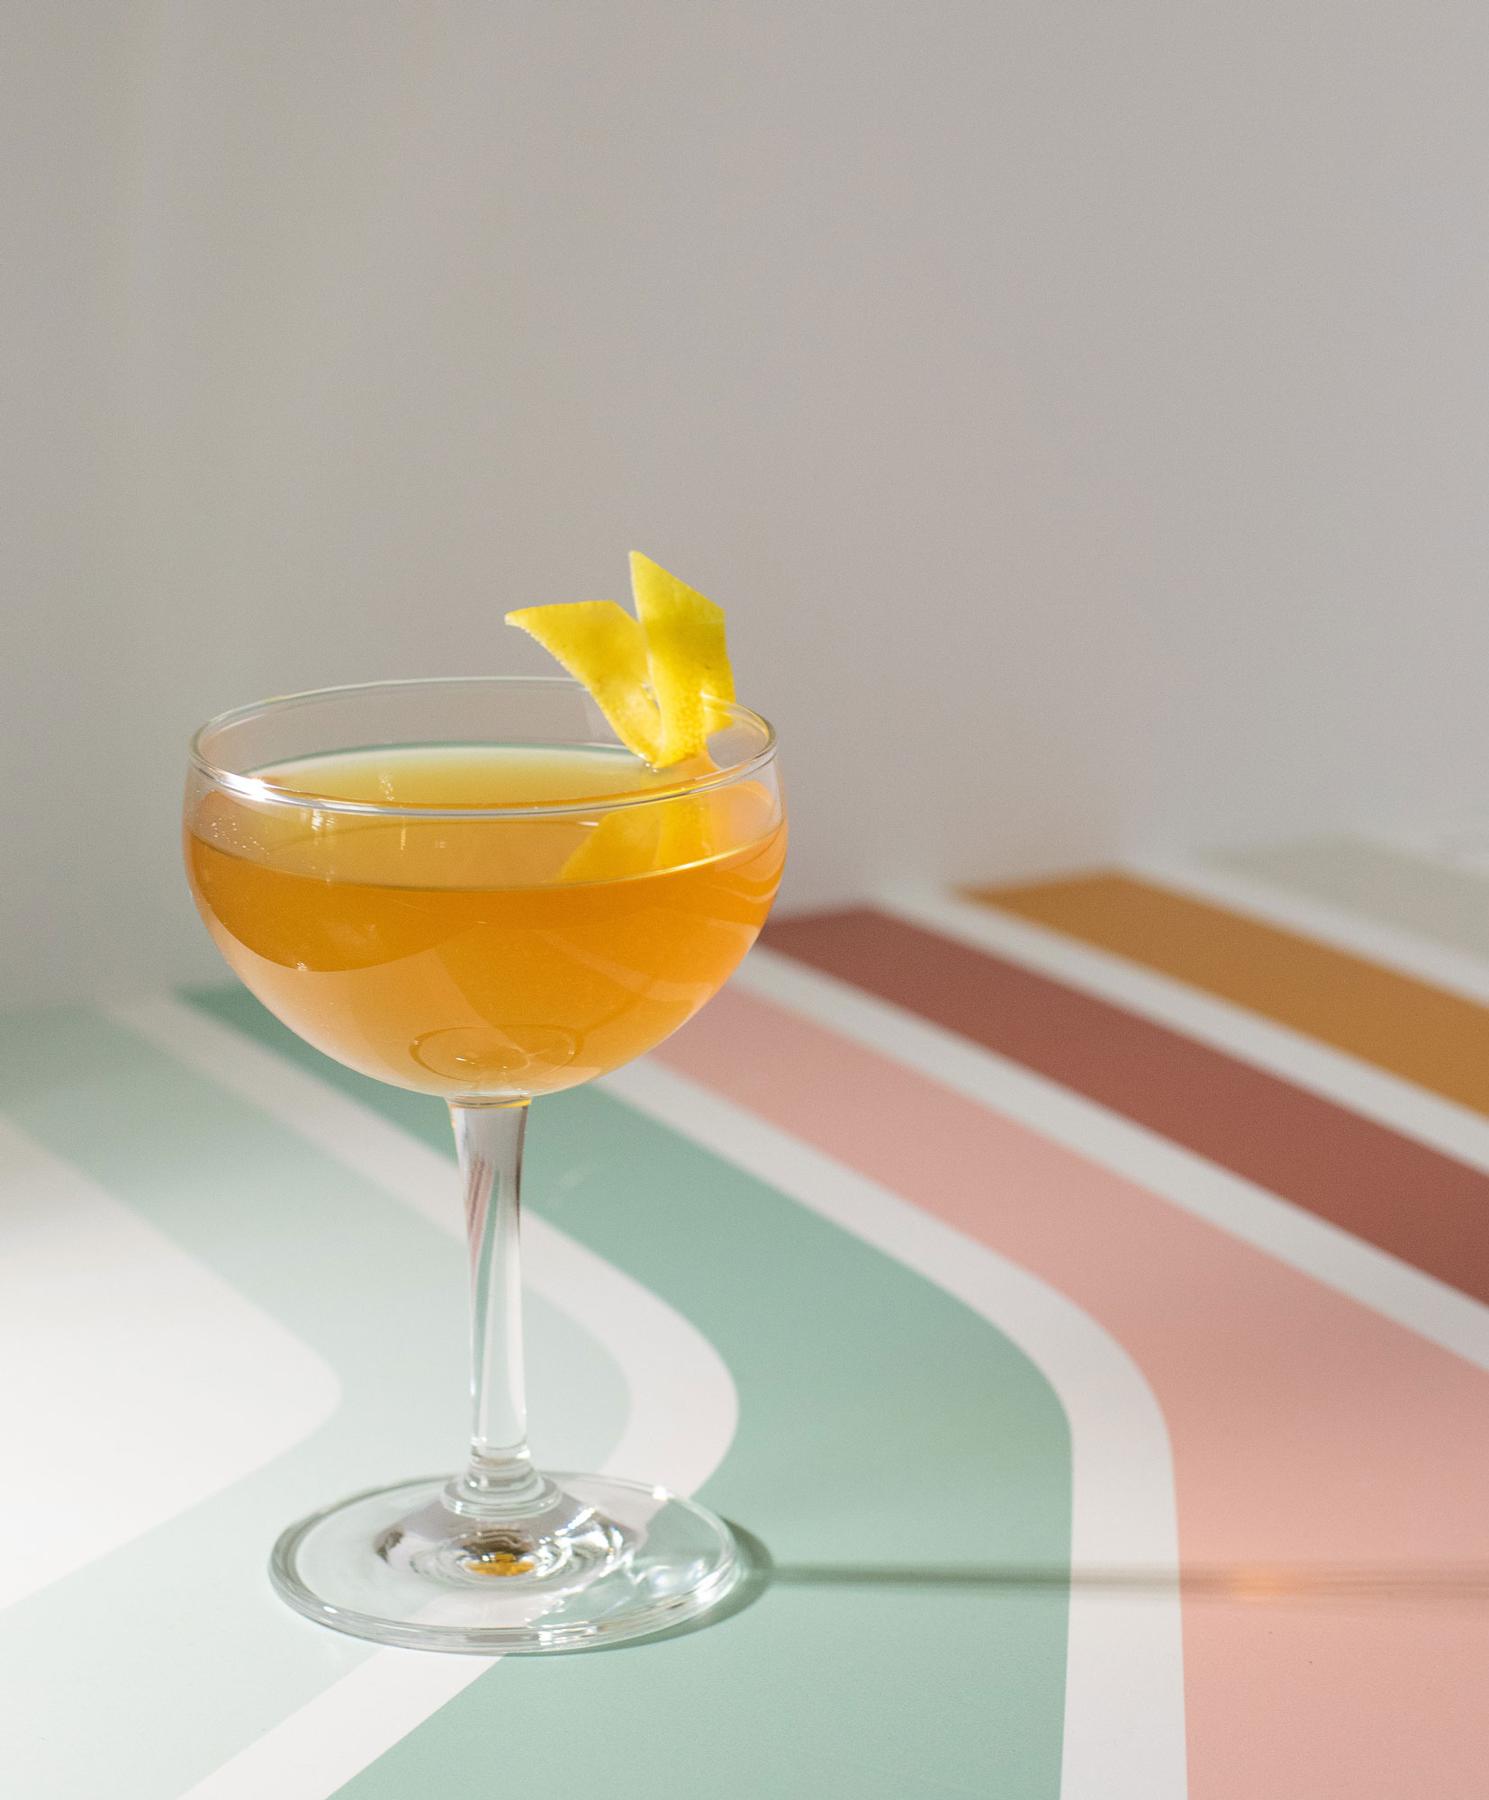 An example of the Algonquin, the mixed drink (drink) featuring rye whiskey, Cocchi Vermouth di Torino Extra Dry, pineapple syrup, orange bitters, and lemon twist; photo by Boon and Caro Sheridan